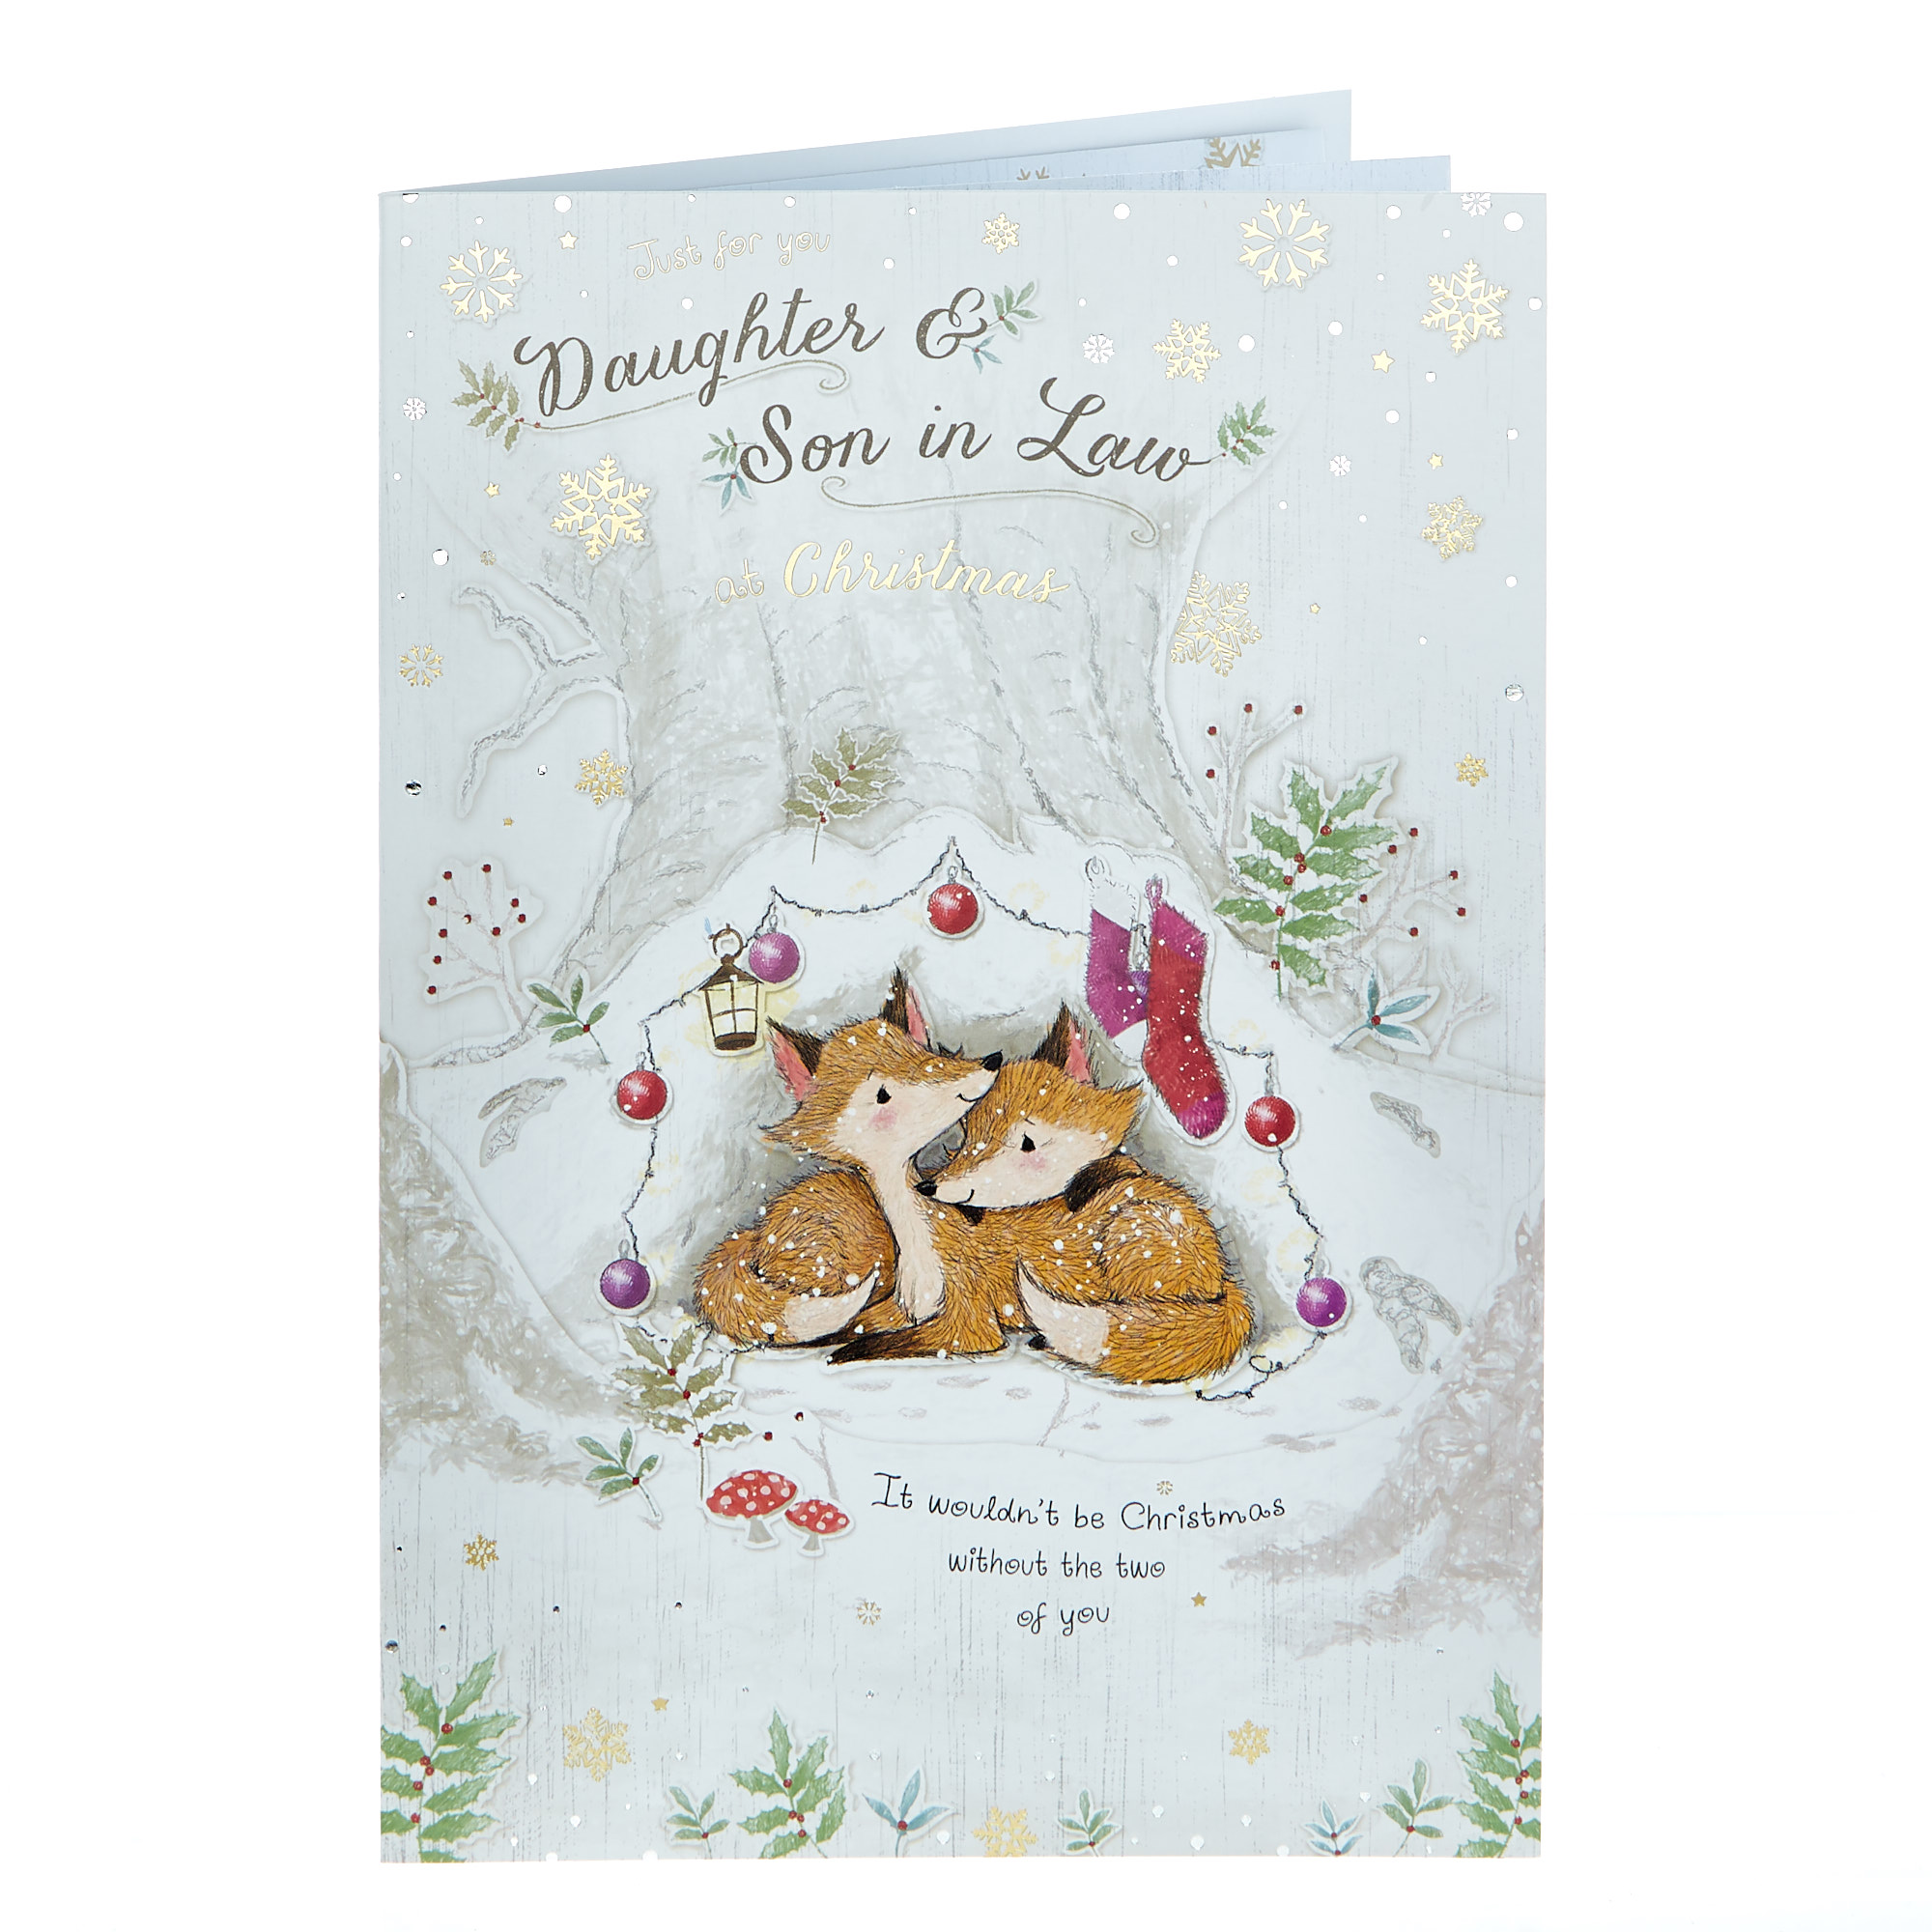 Christmas Card - Daughter & Son In Law Foxes